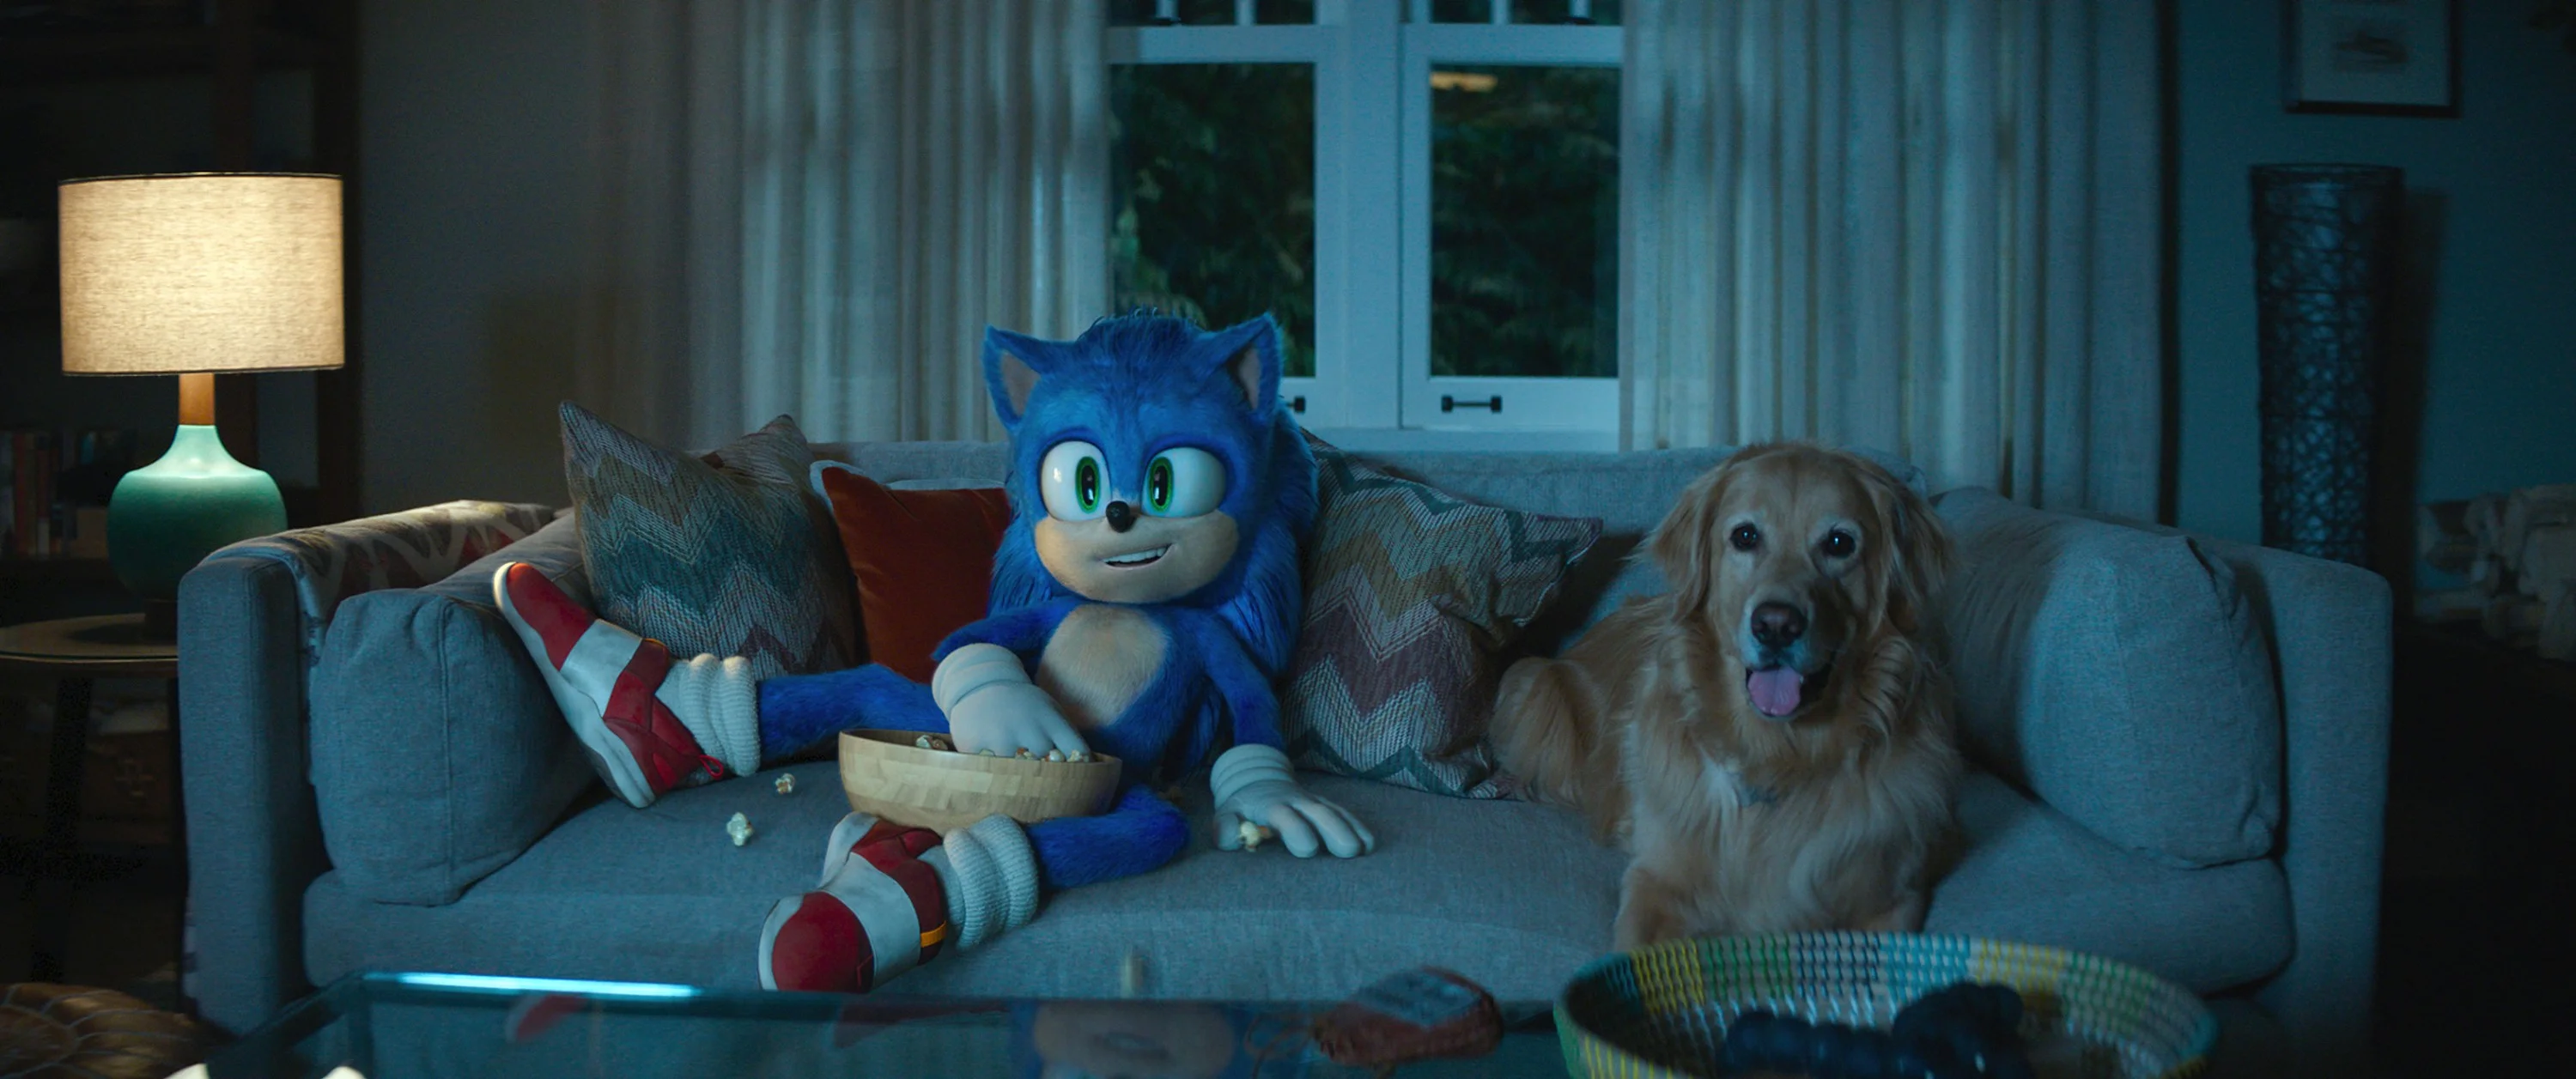 'Sonic the Hedgehog 2' breaks box office record for game adaptation film, Michael Bay's new film fails at box office